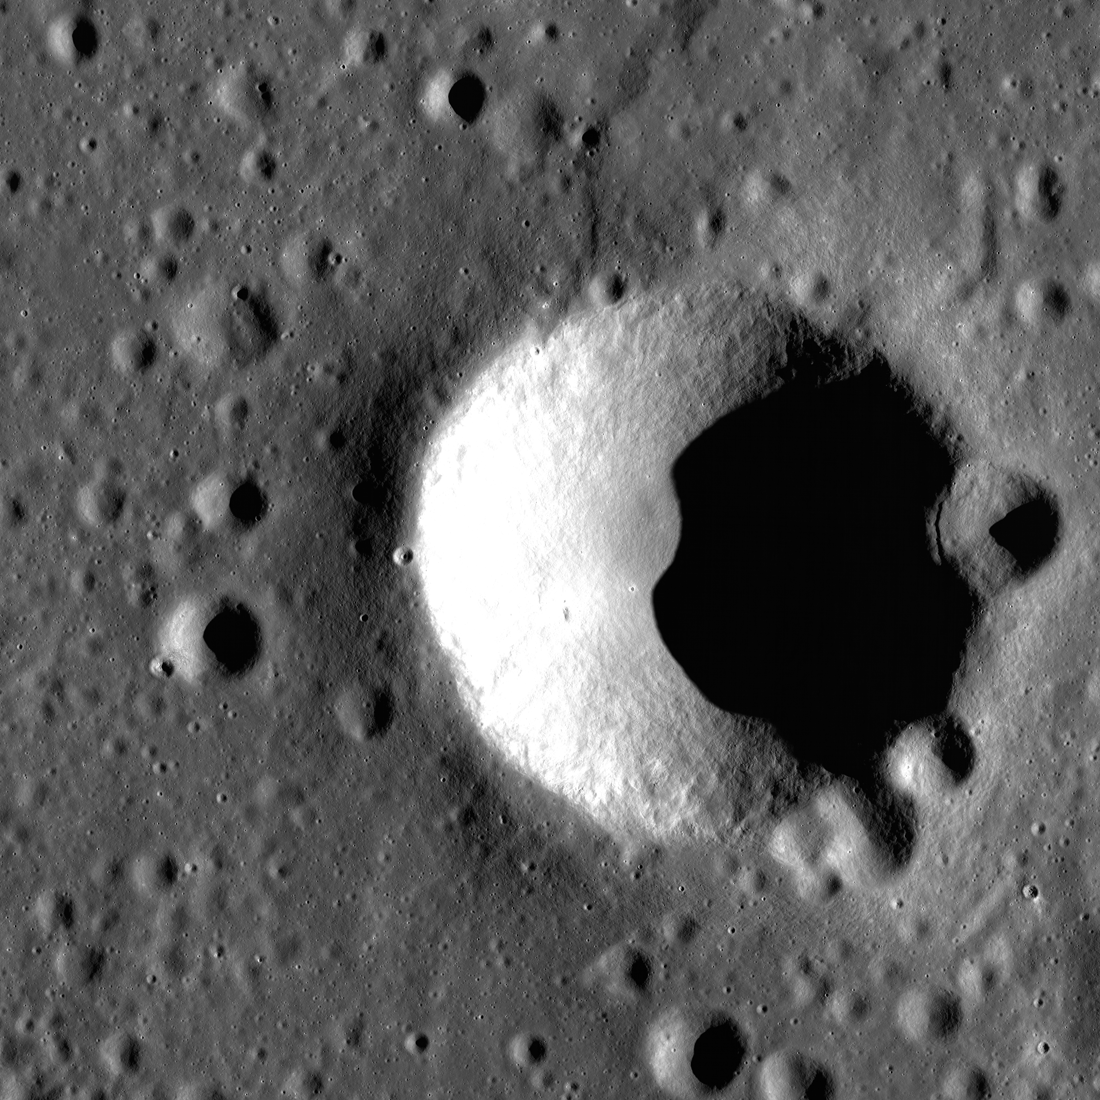 Order from Chaos — Blagg Crater